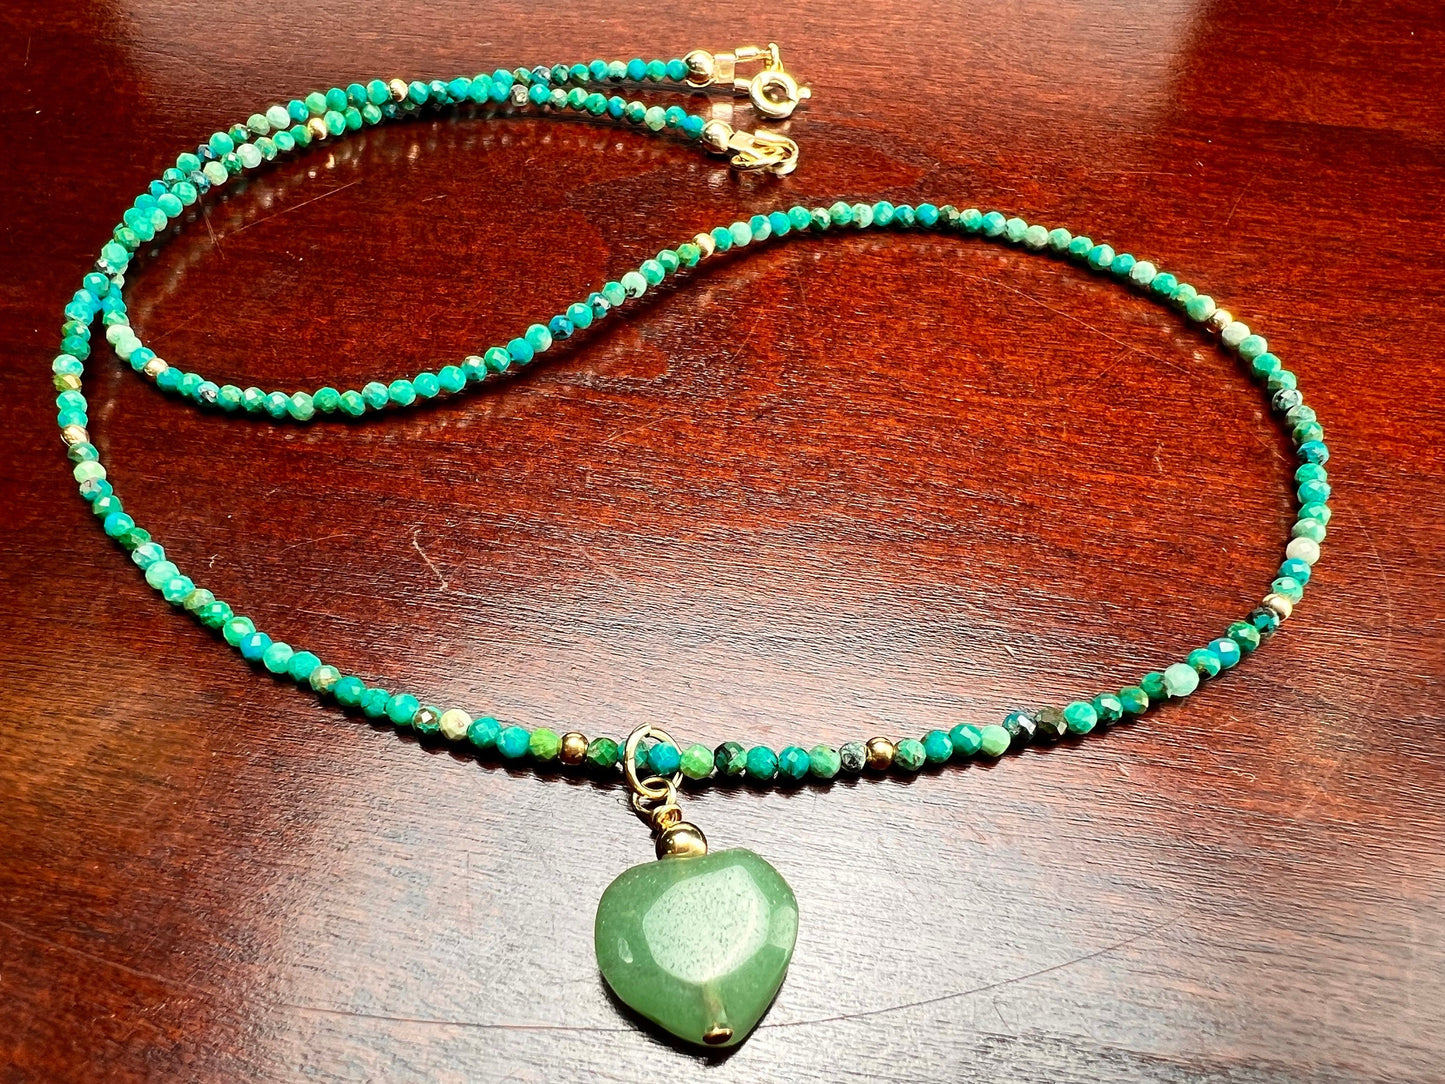 Natural Chrysocolla 2mm Faceted Round with 14k Gold Filled 2mm spacer bead and clasp ,Choker Layering Elegant Necklace Gift Chakra Healing